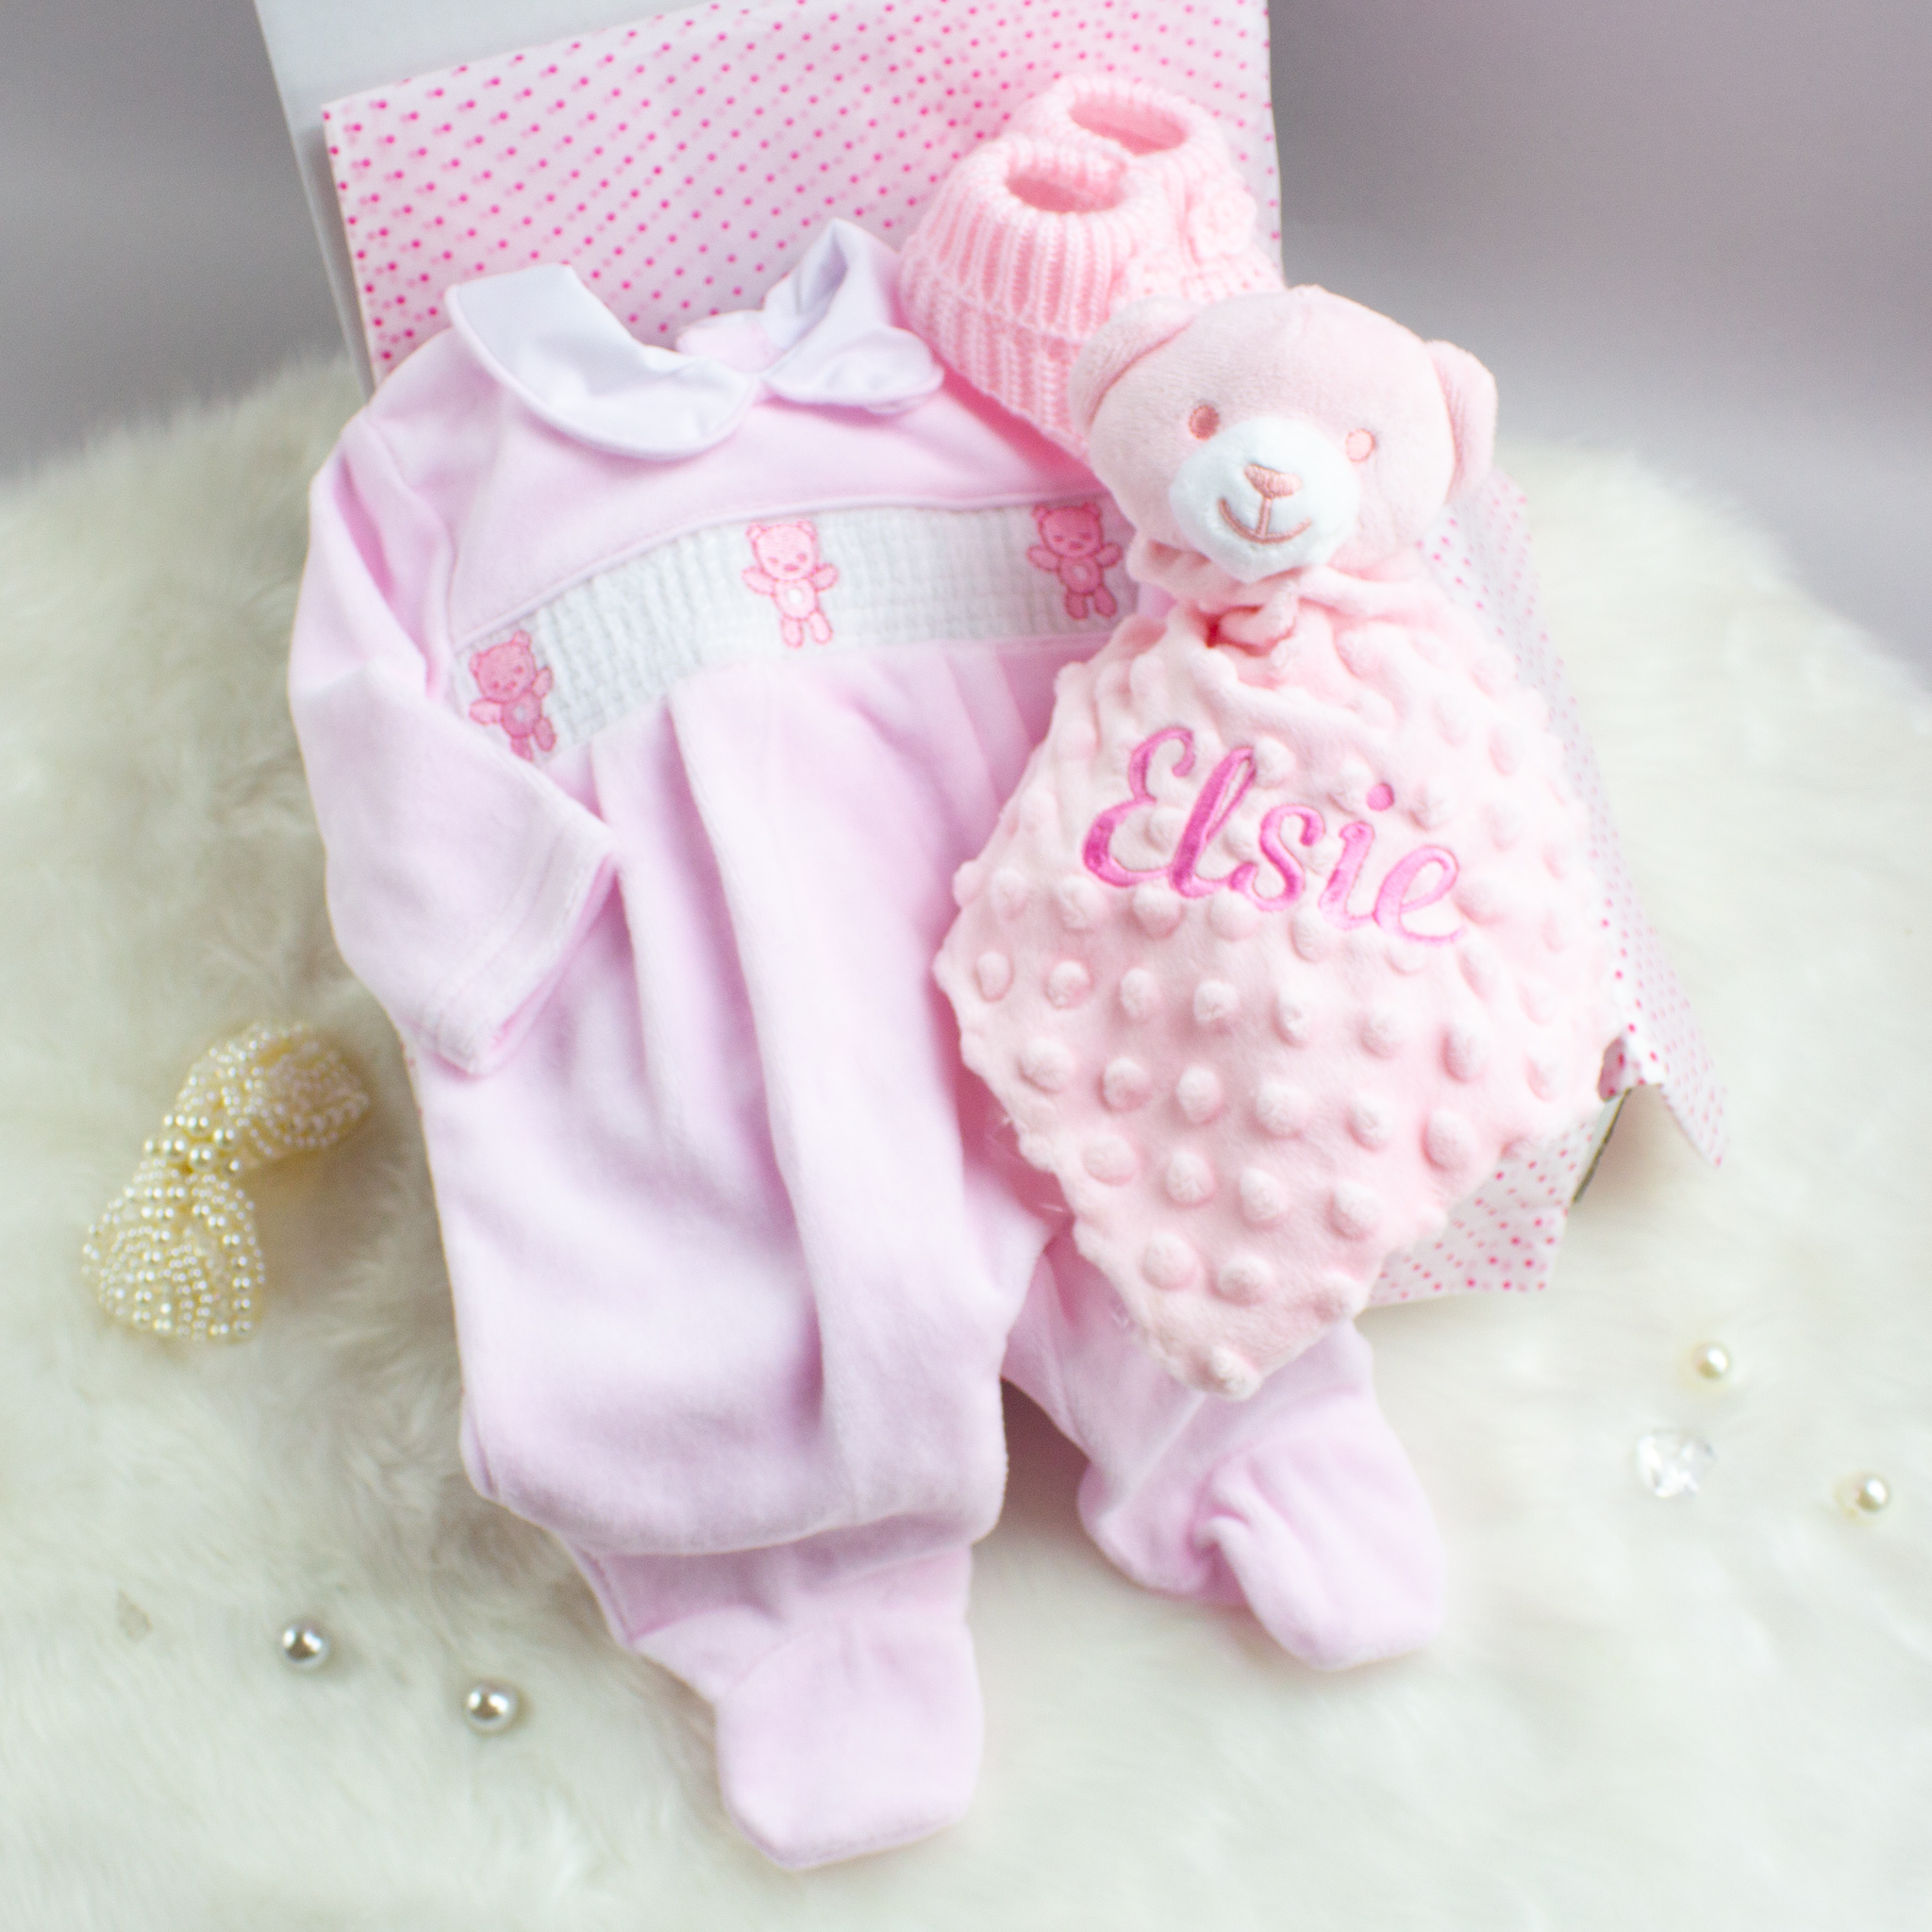 Personalised Baby Girl Teddy Bear clothes gift